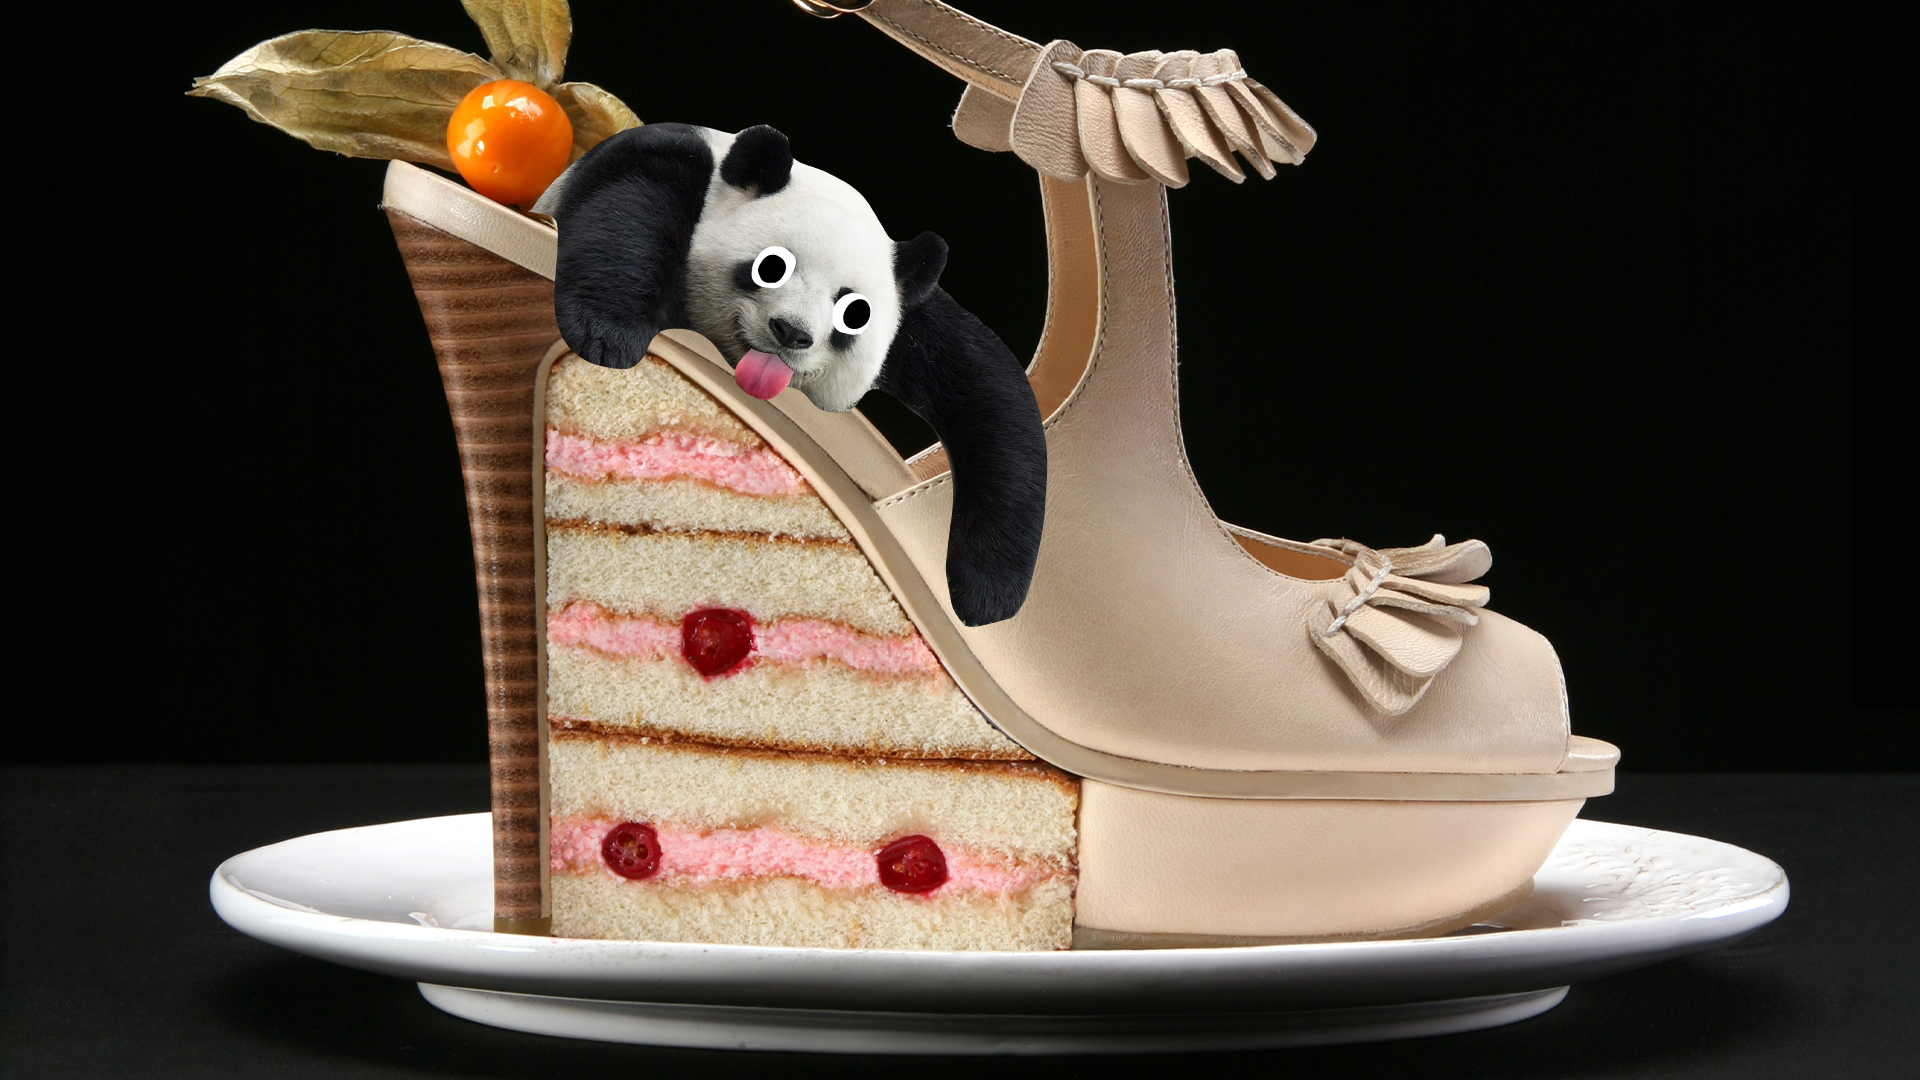 Shoe with cake in it and derpy panda